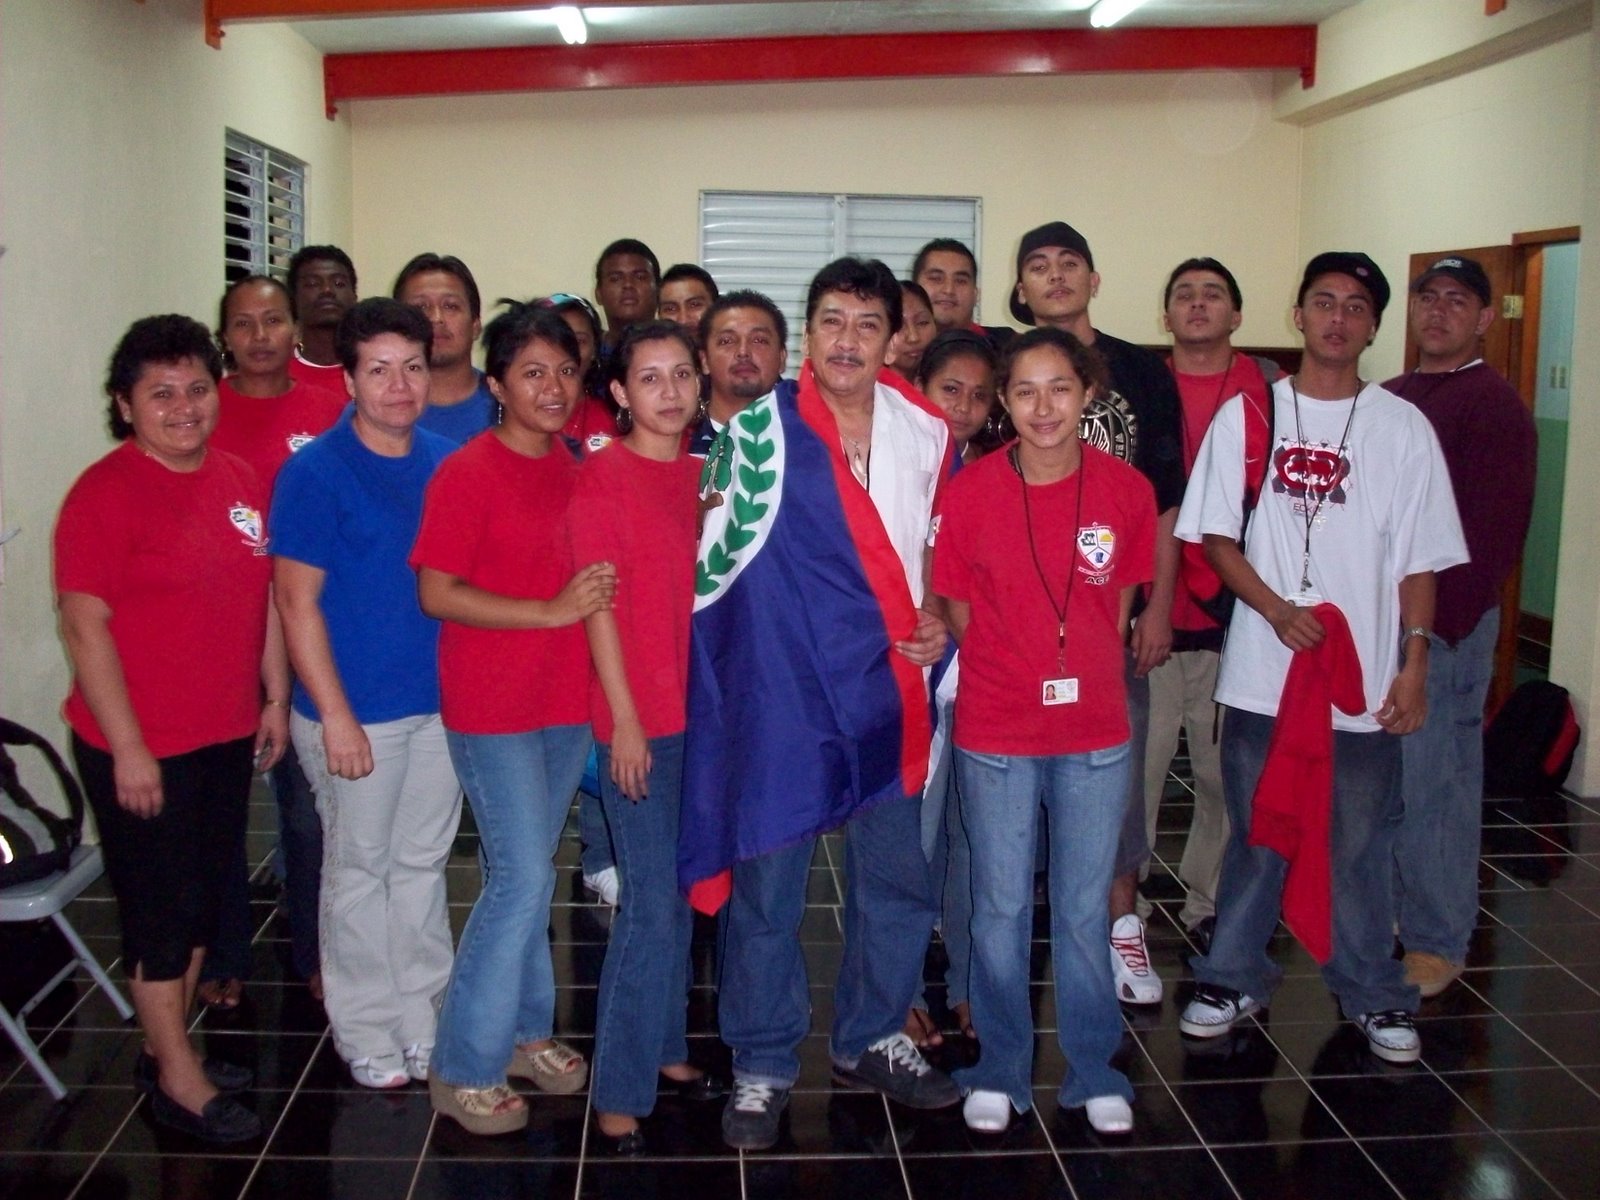 THIS BLOG IS DEDICATED TO ABEL AND THE THIRD YEAR STUDENTS OF 2007-2008 CCC ACE